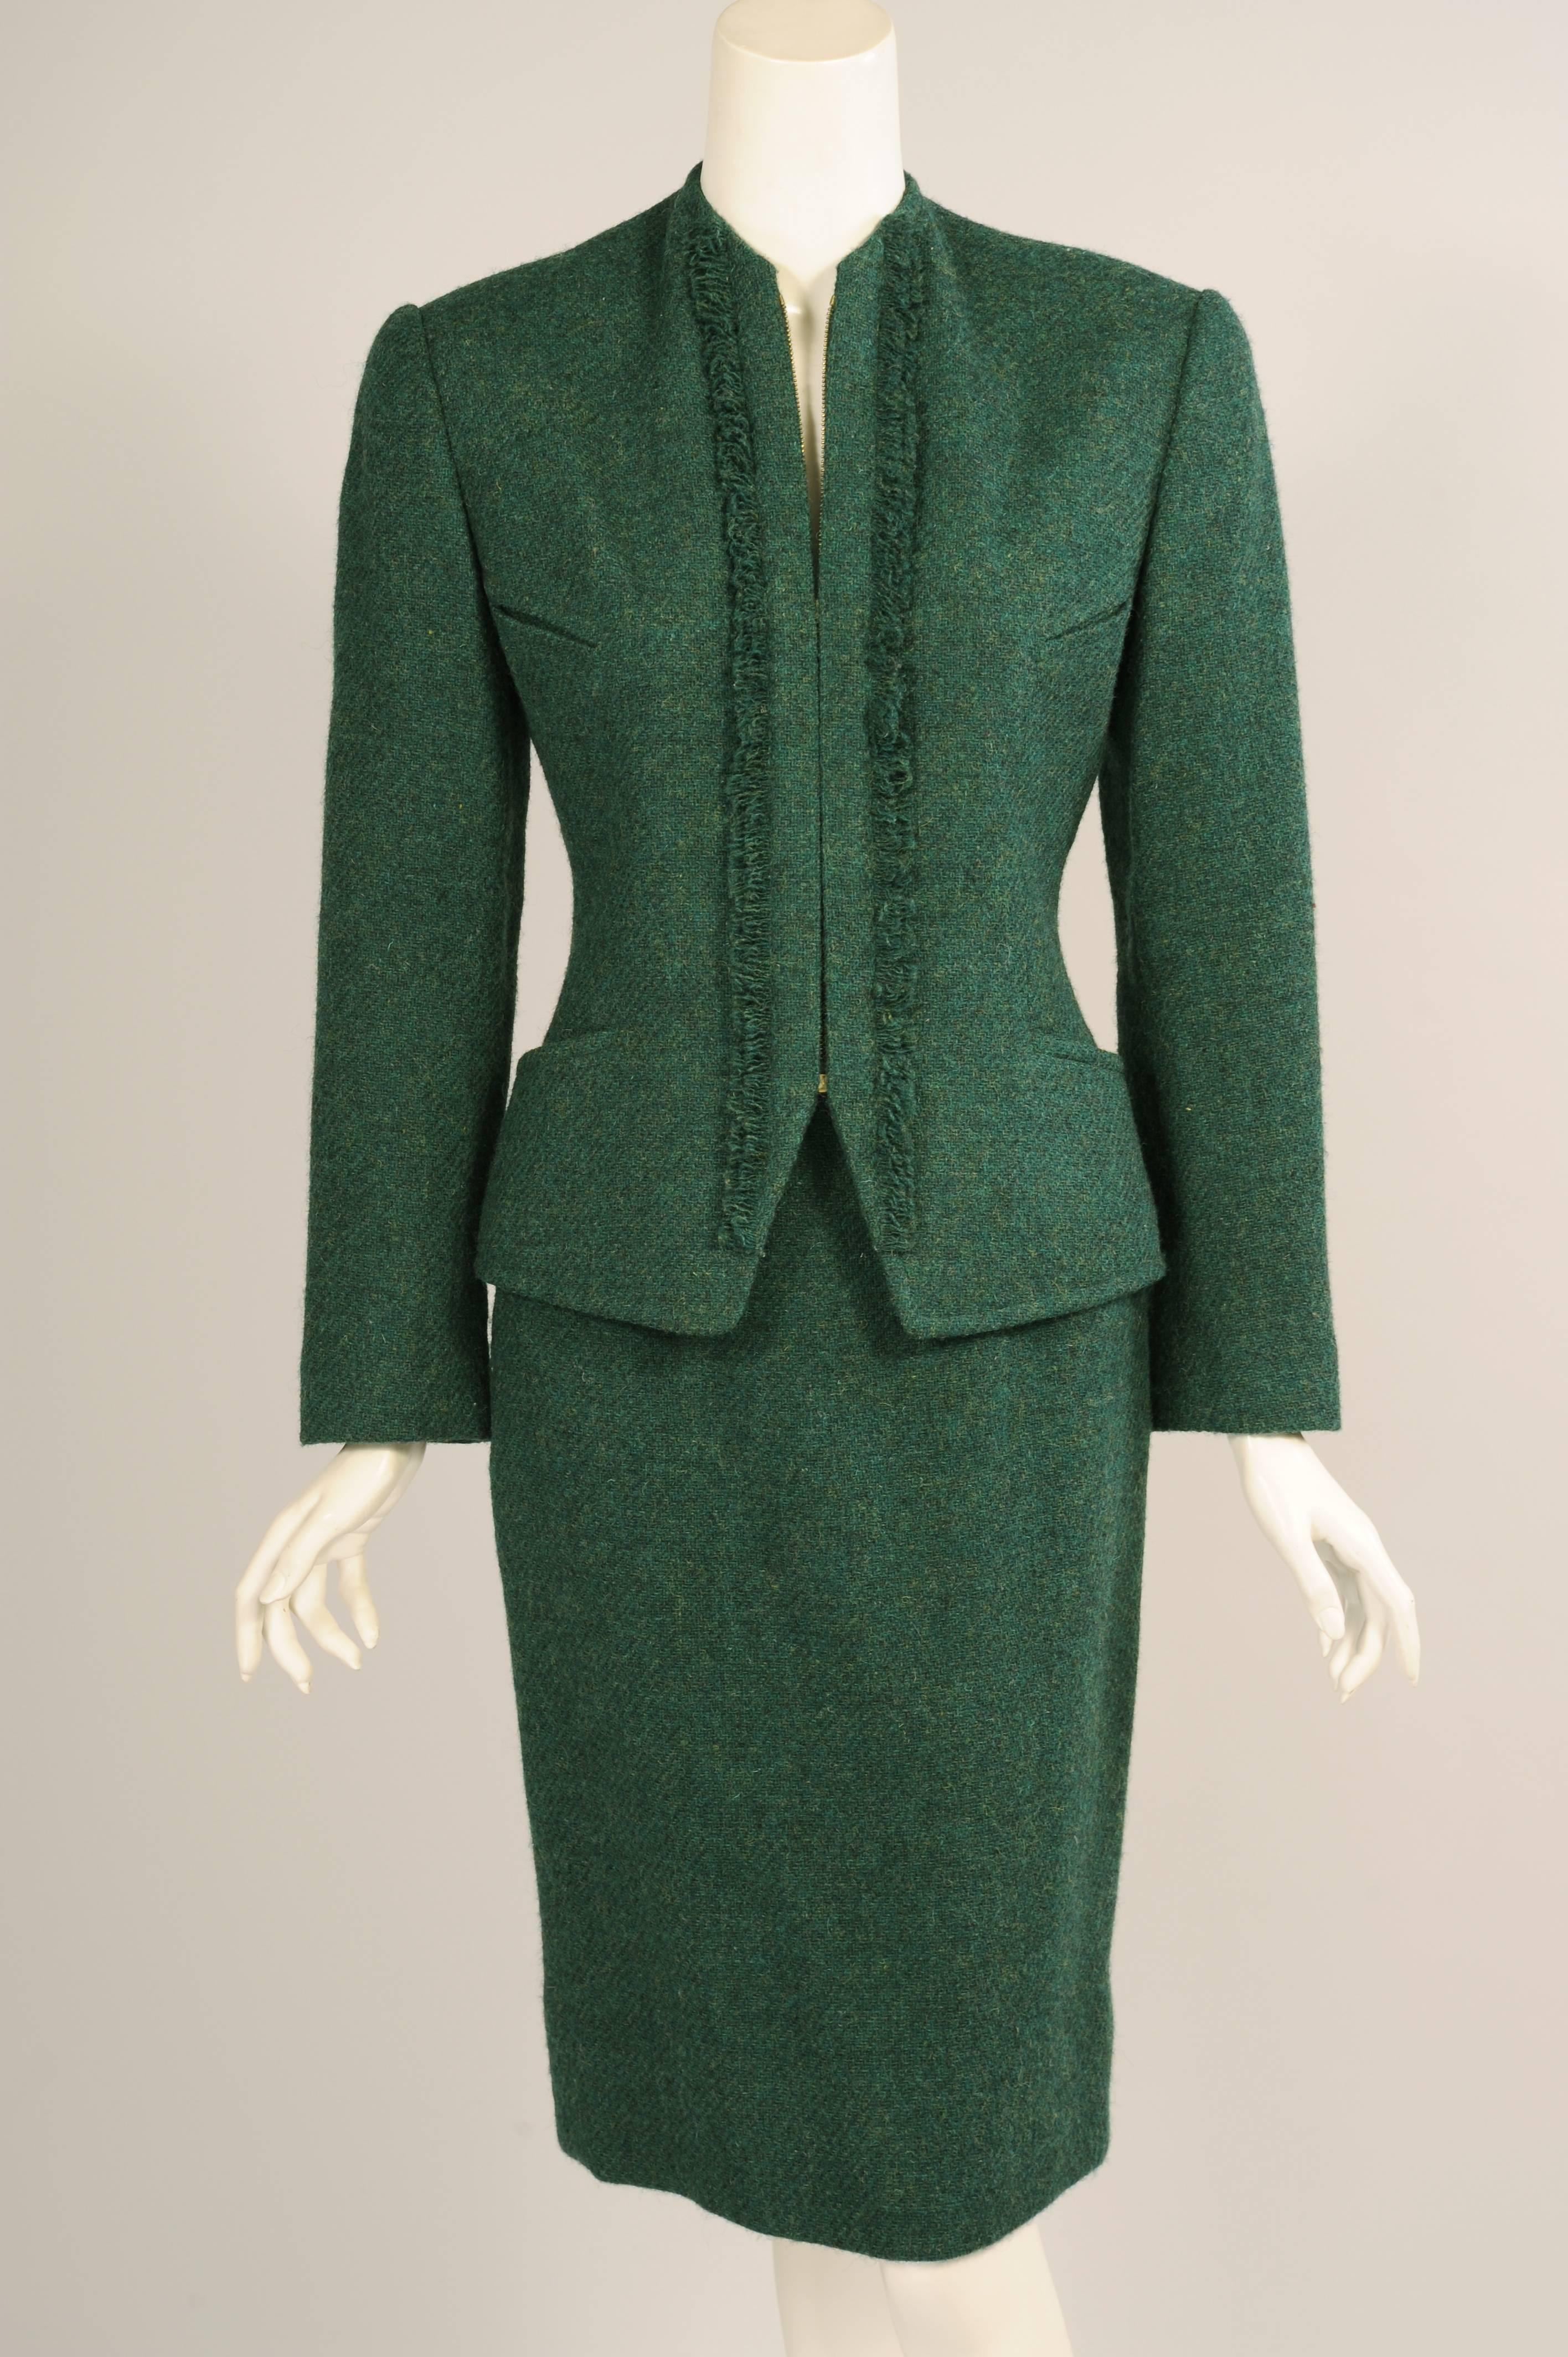 A fine heather green wool, accented with a vertical fringe on either side of the center front zipper is used for this chic jacket and skirt from Hermes, Paris. The fitted collarless jacket has four pockets. It is fully lined and marked a size 40.